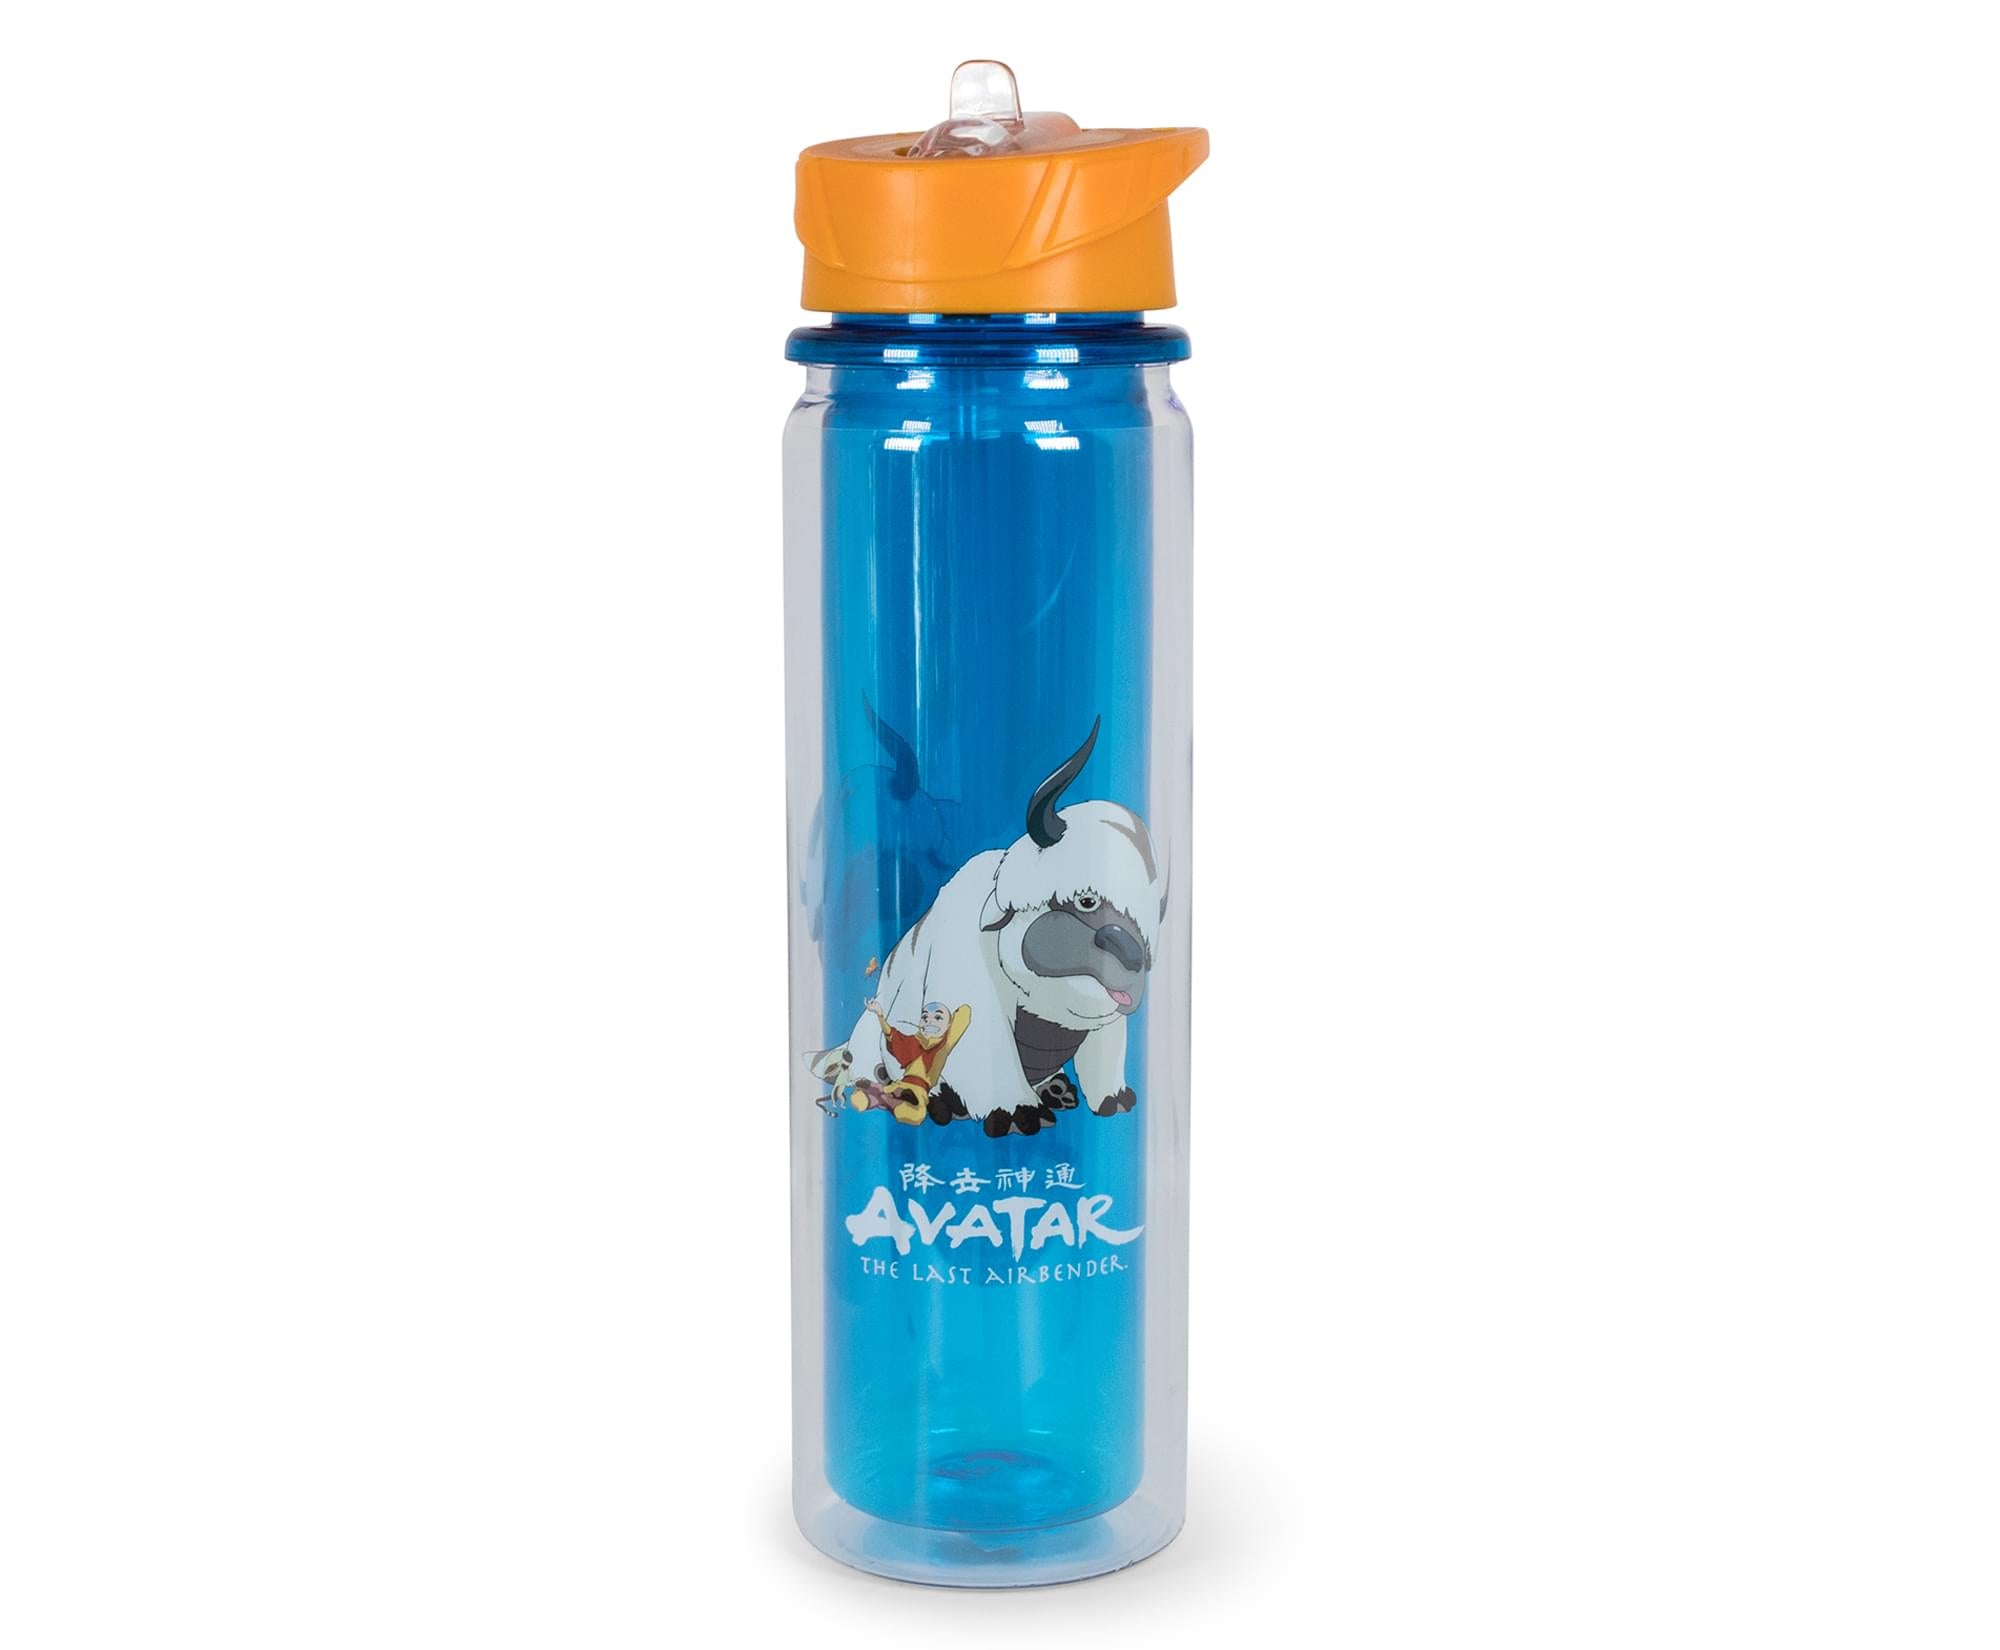 Avatar: The Last Airbender Aang And Appa Water Bottle , Holds 16 Ounces